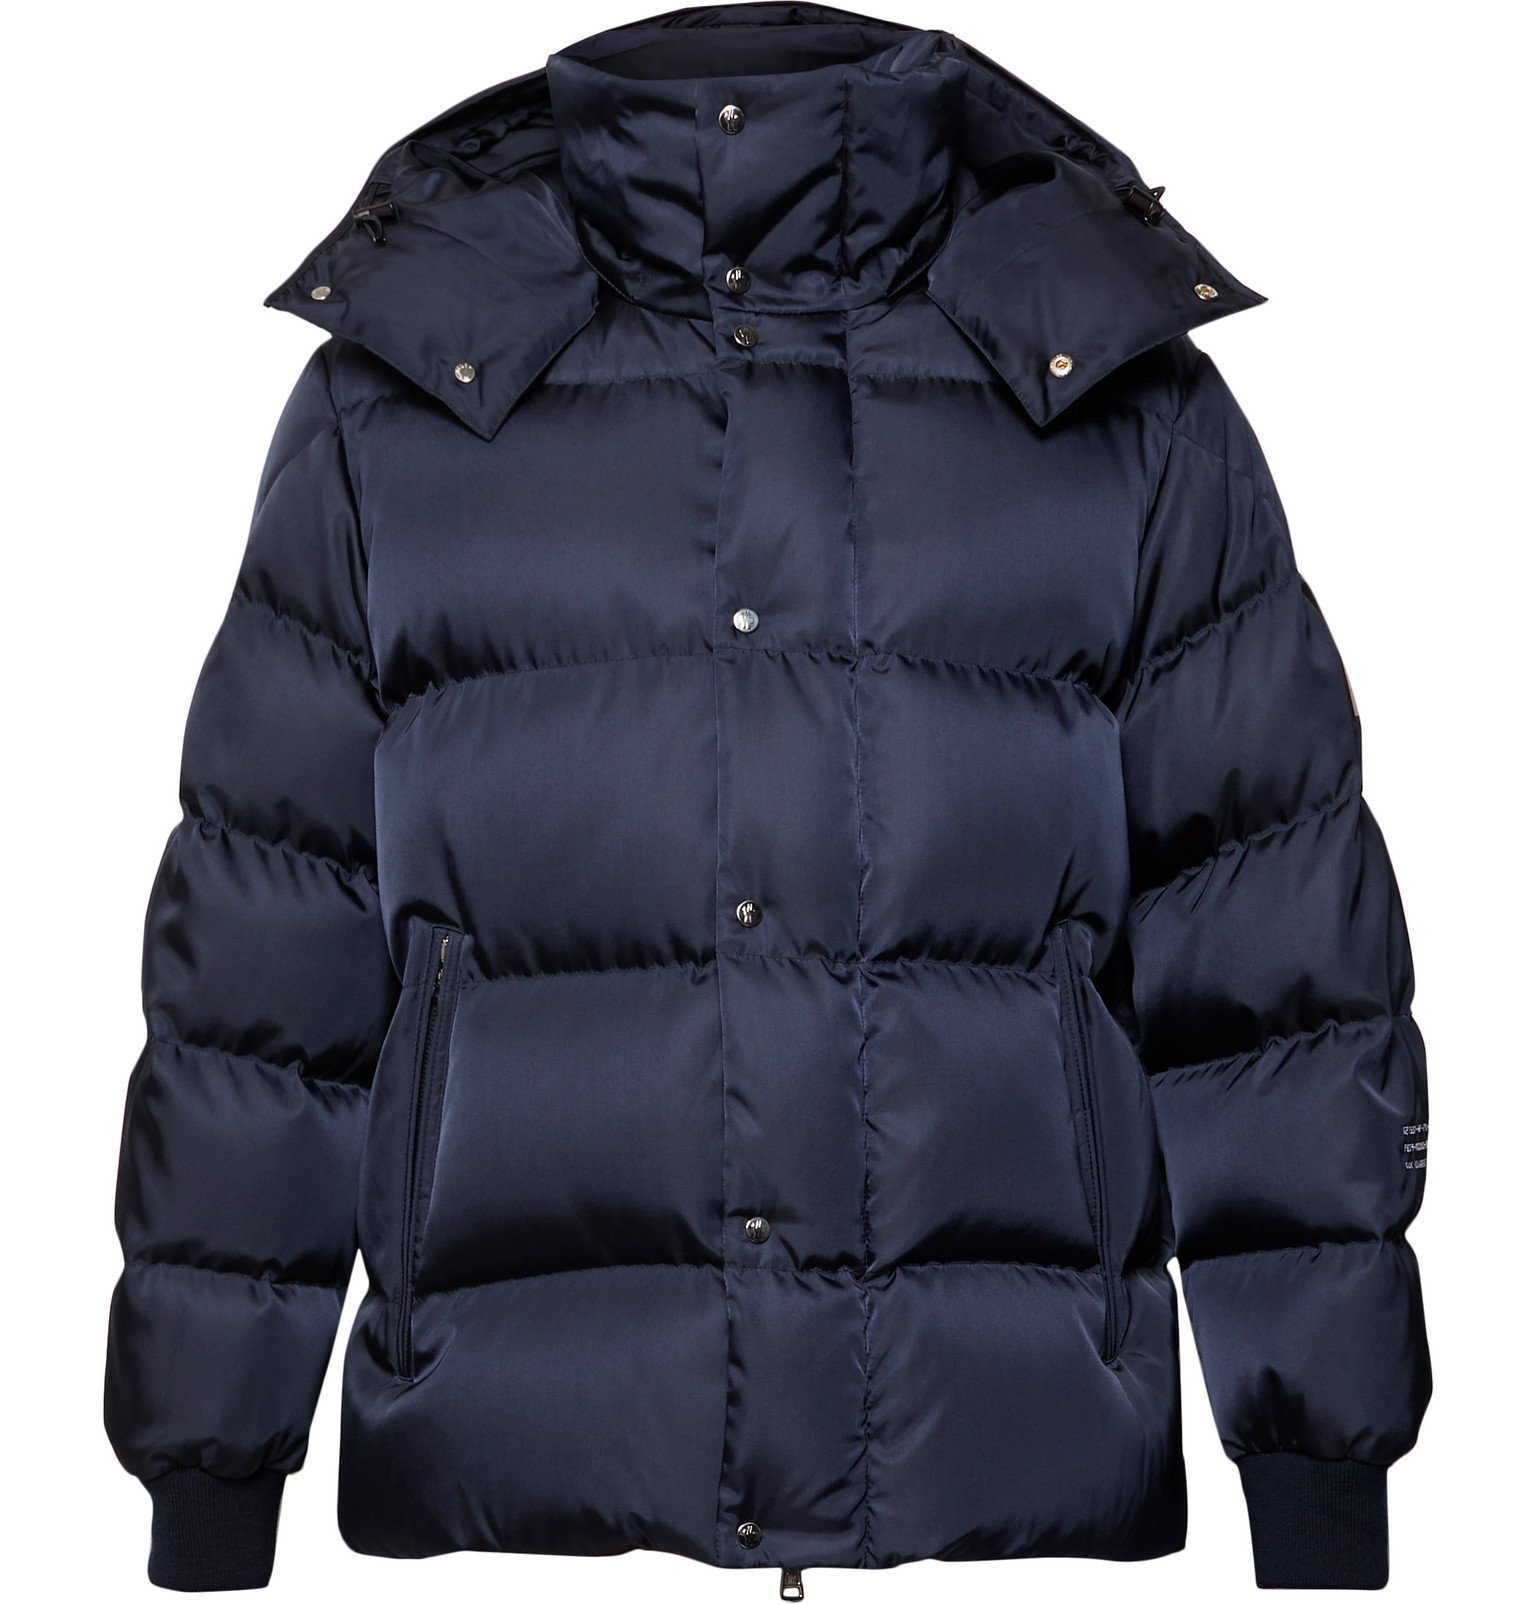 Moncler Genius - 7 Moncler Fragment Falcon Quilted Printed Nylon Hooded ...